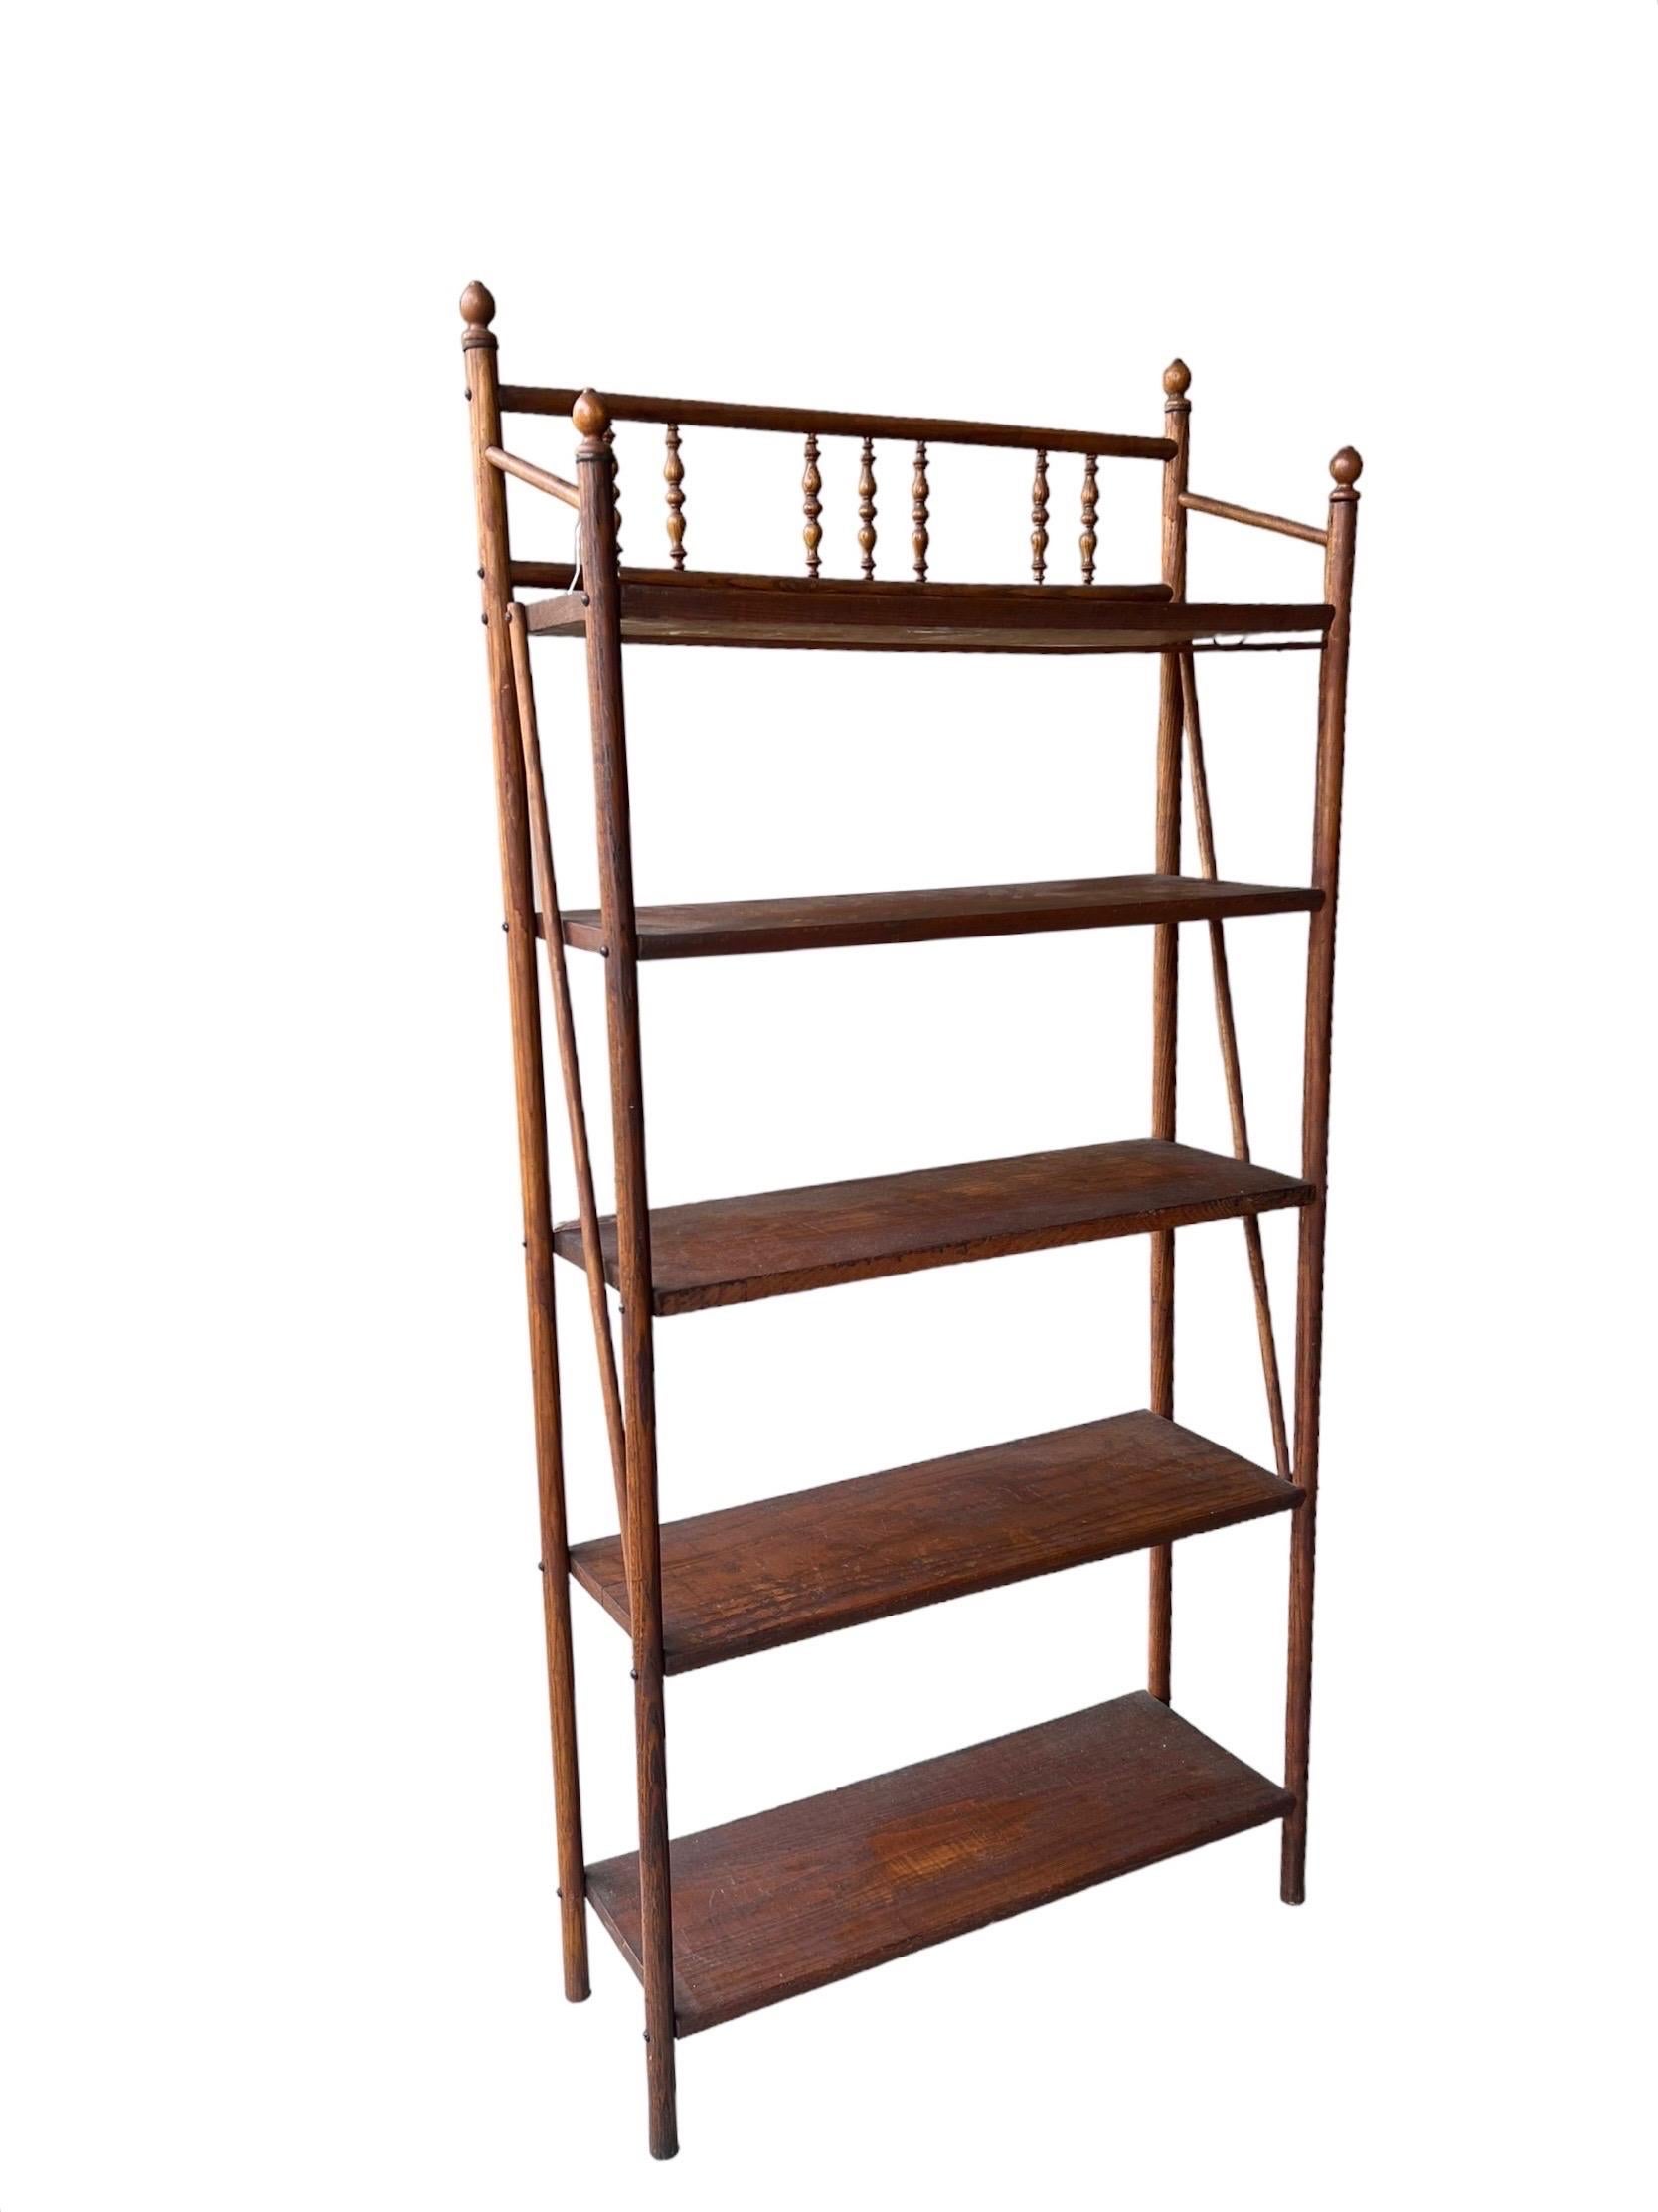 Antique Wood Etagere Book Shelf or Bookcase Bobbin Wooden Turned Details In Good Condition For Sale In Seattle, WA